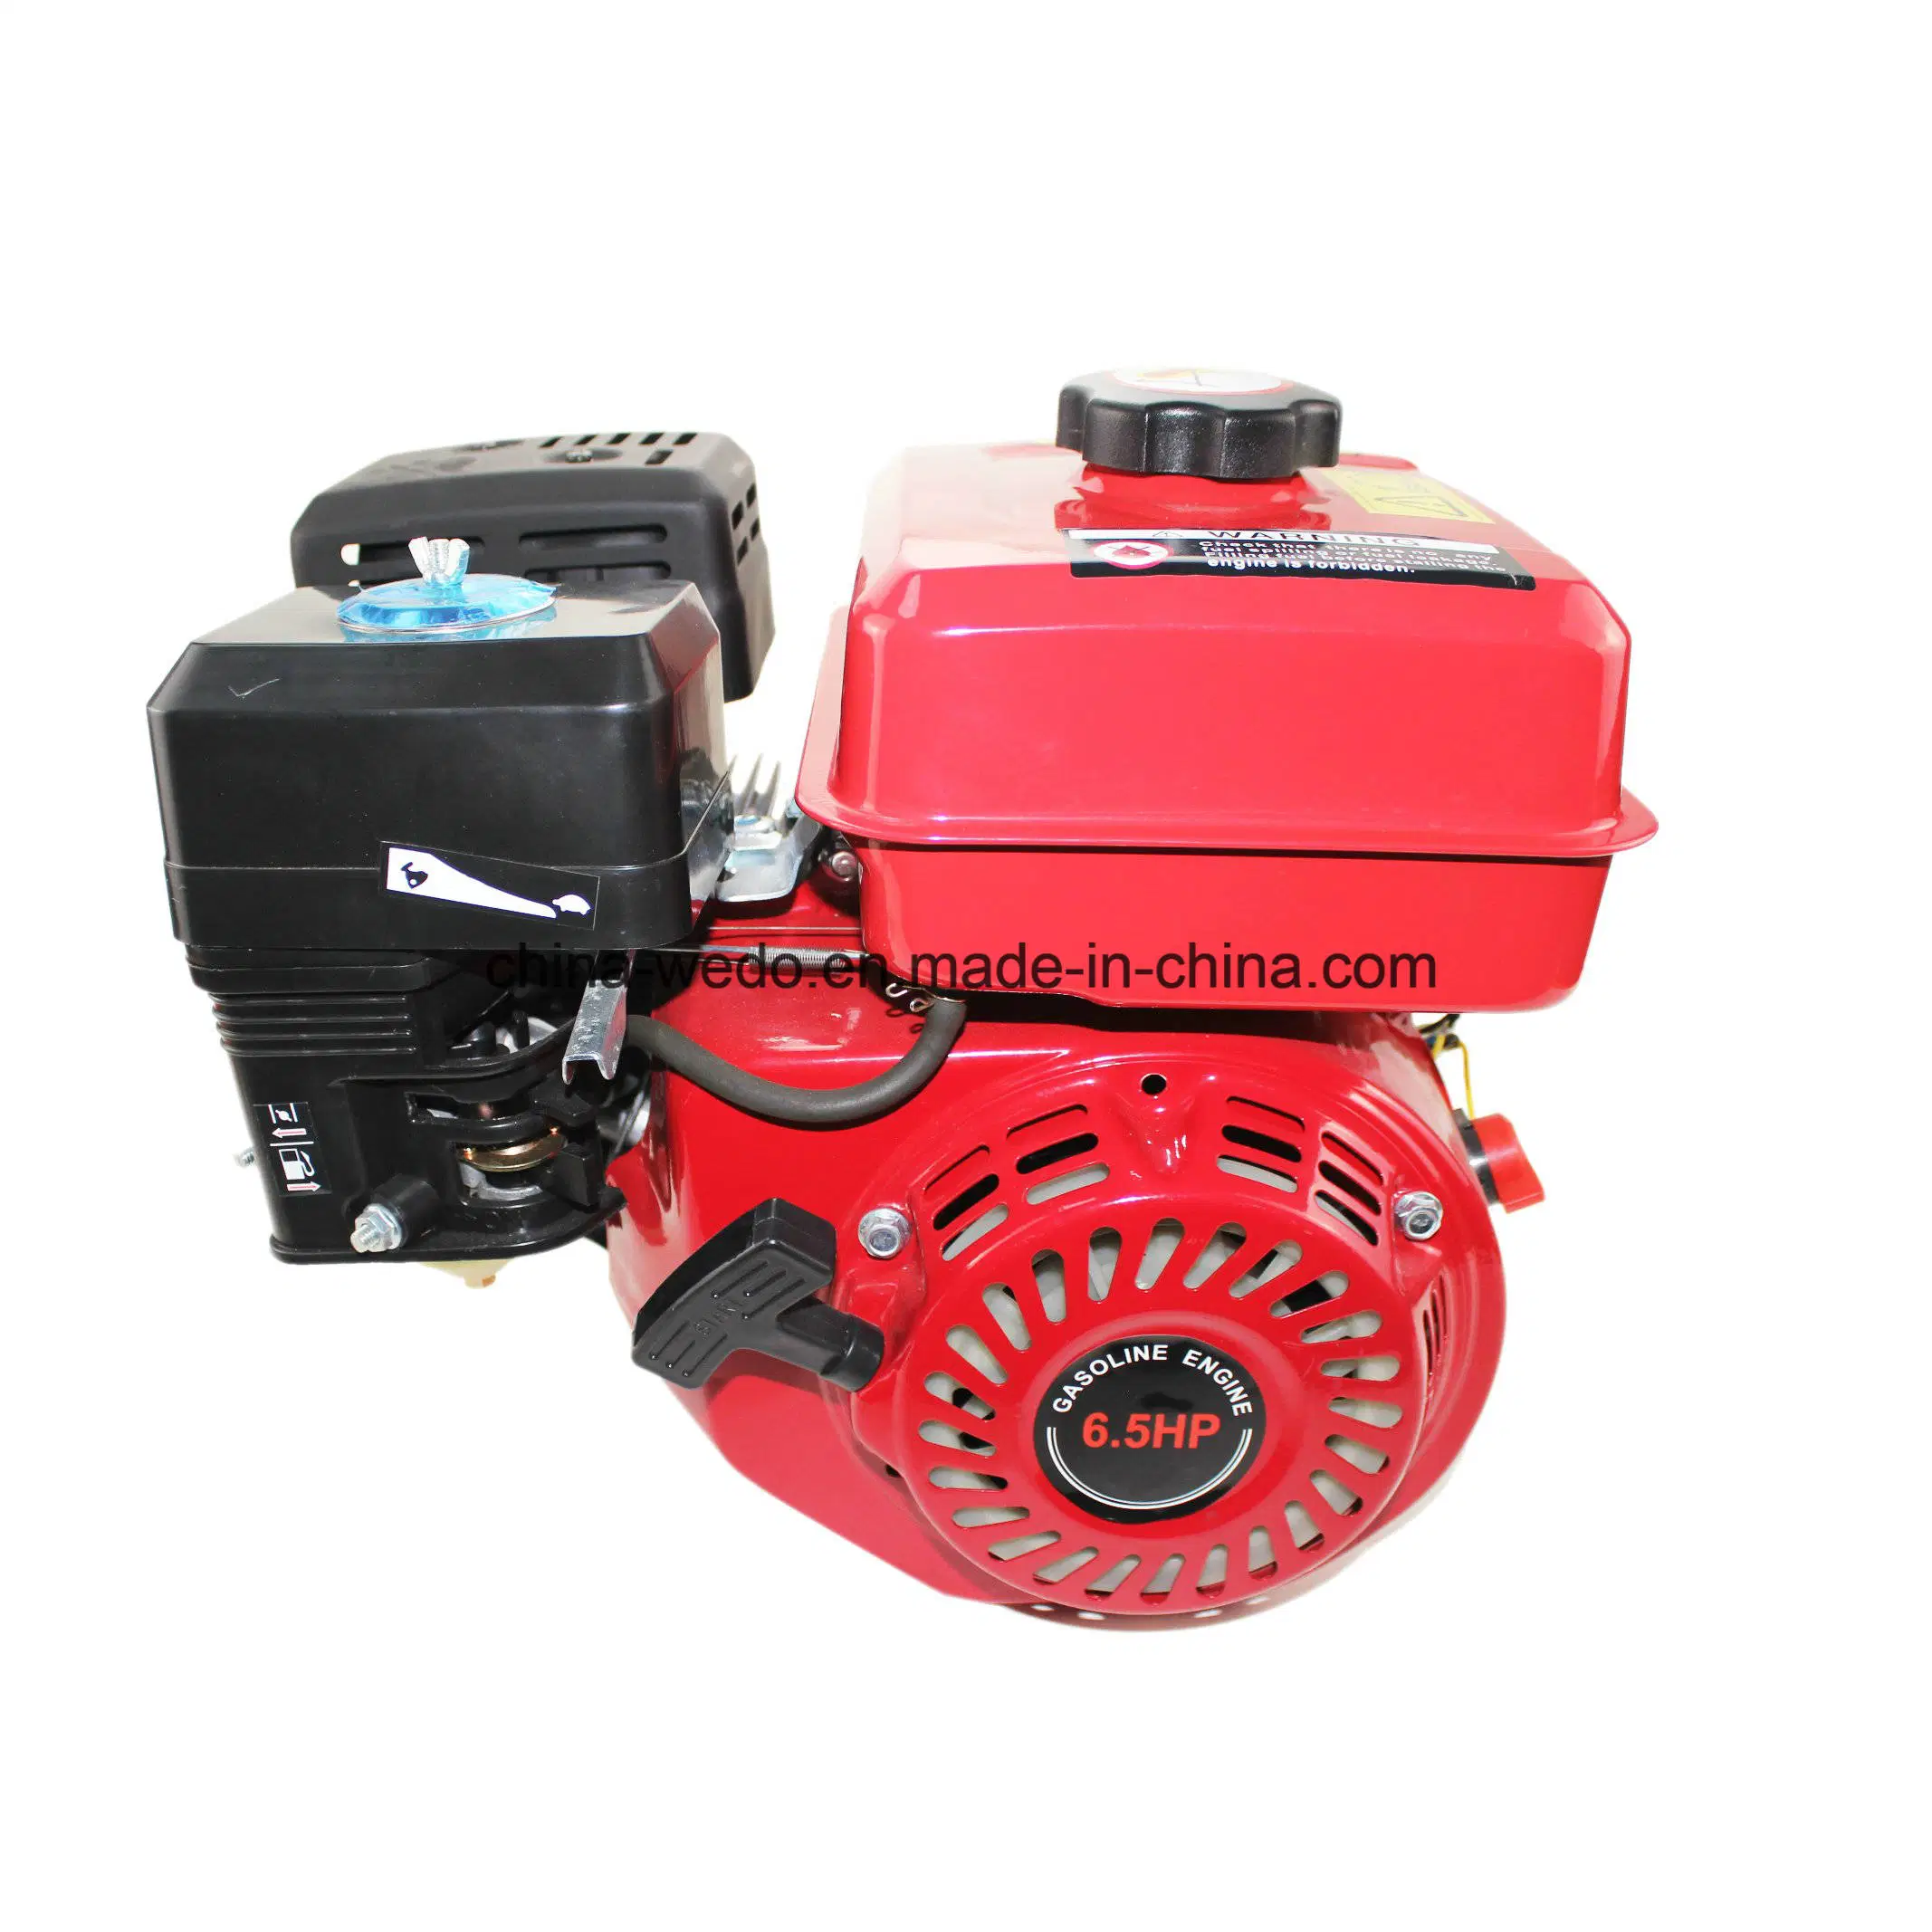 Ohv Type 6.5HP Small Gasoline Engine 168 for Gasoline Generator